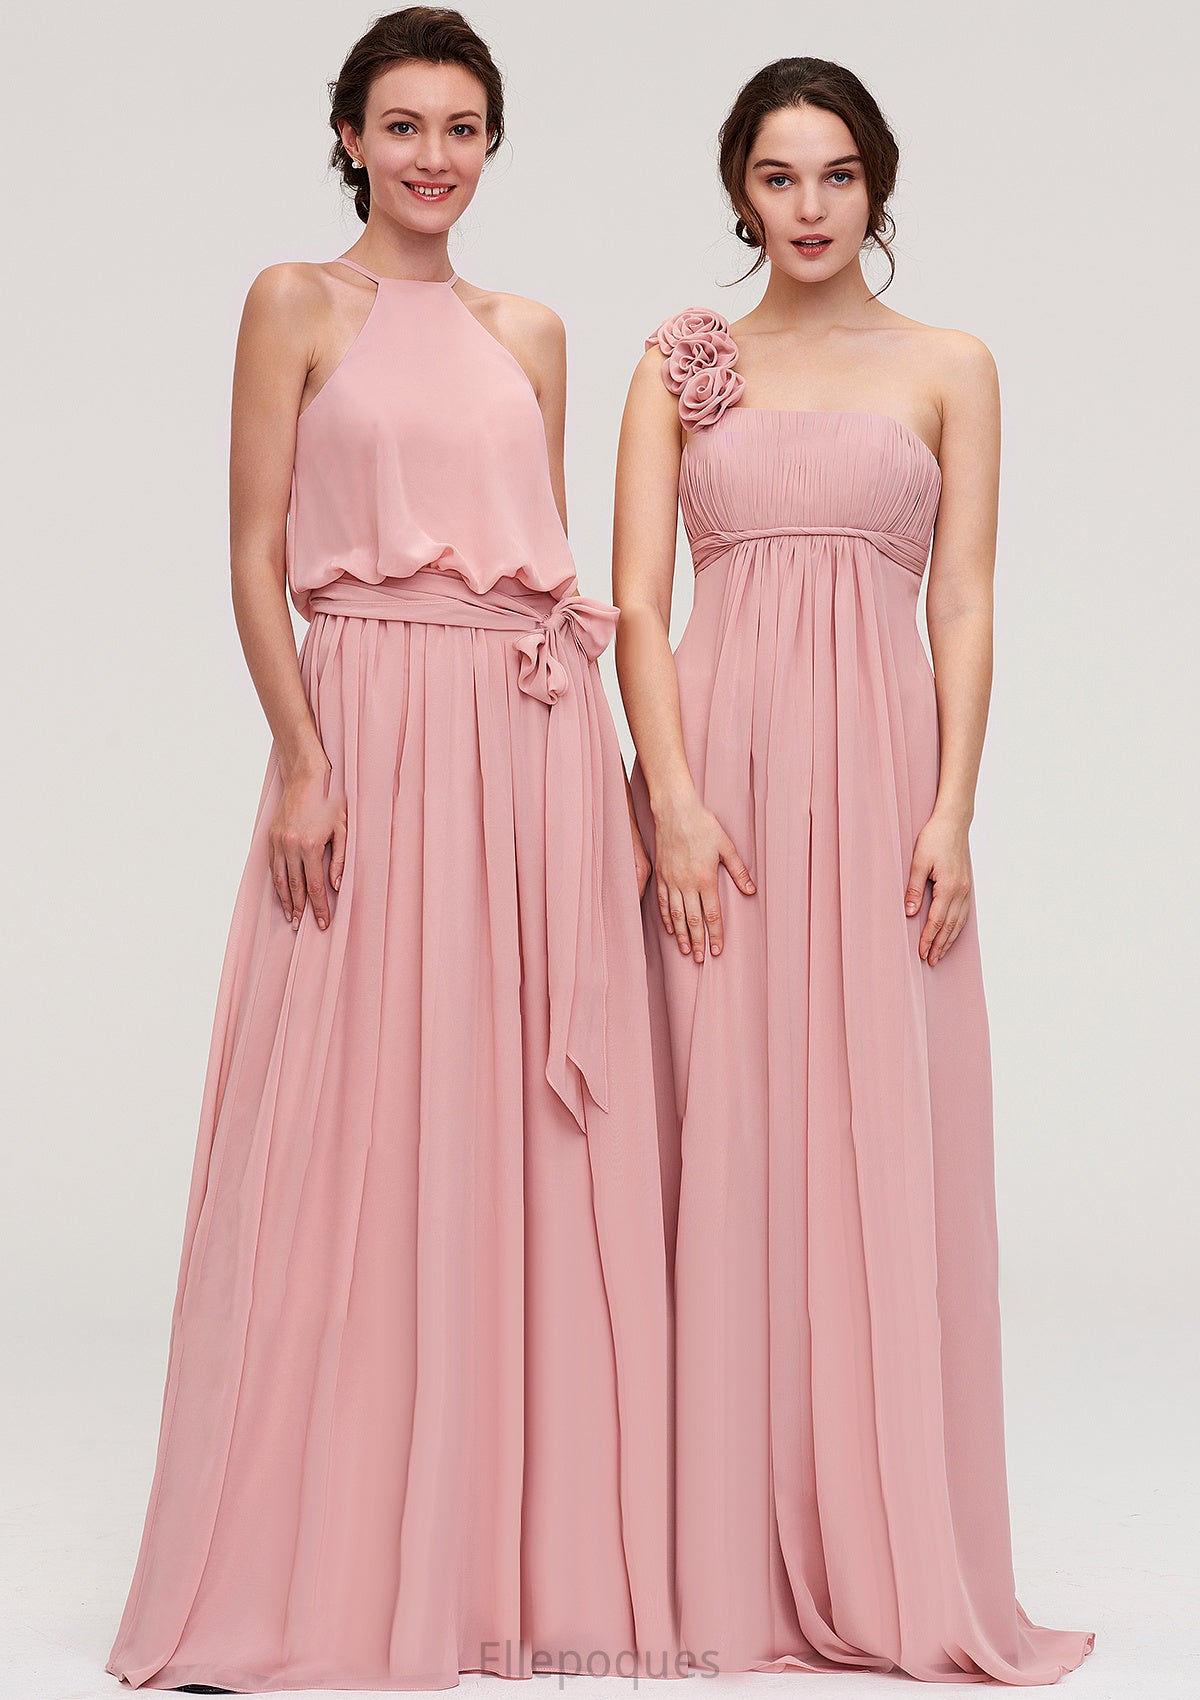 Sleeveless Scoop Neck A-line/Princess Chiffon Long/Floor-Length Bridesmaid Dresseses With Pleated Sashes Maleah HOP0025476